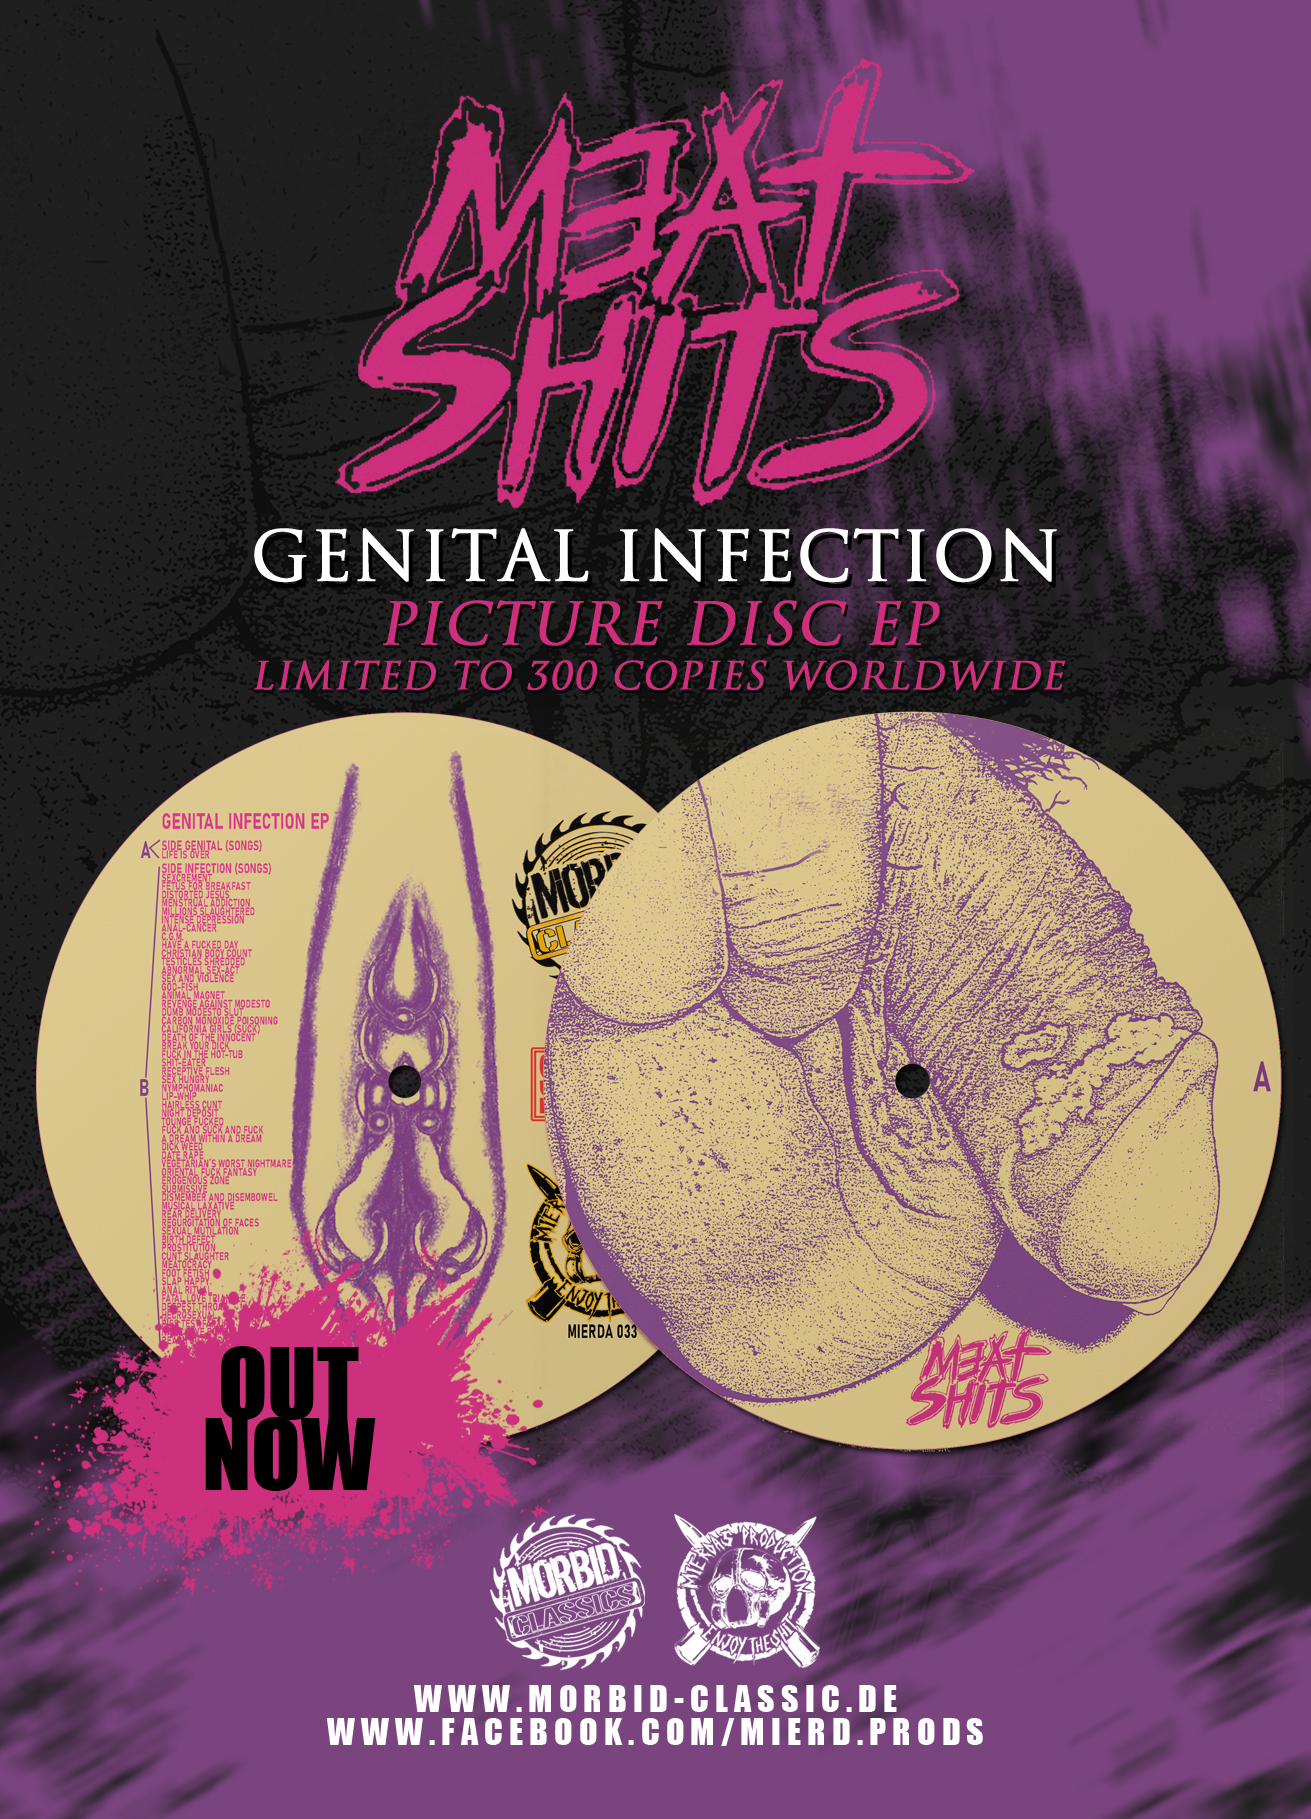 Meat Shits Genital Infection Picture Disc Vinyl EP